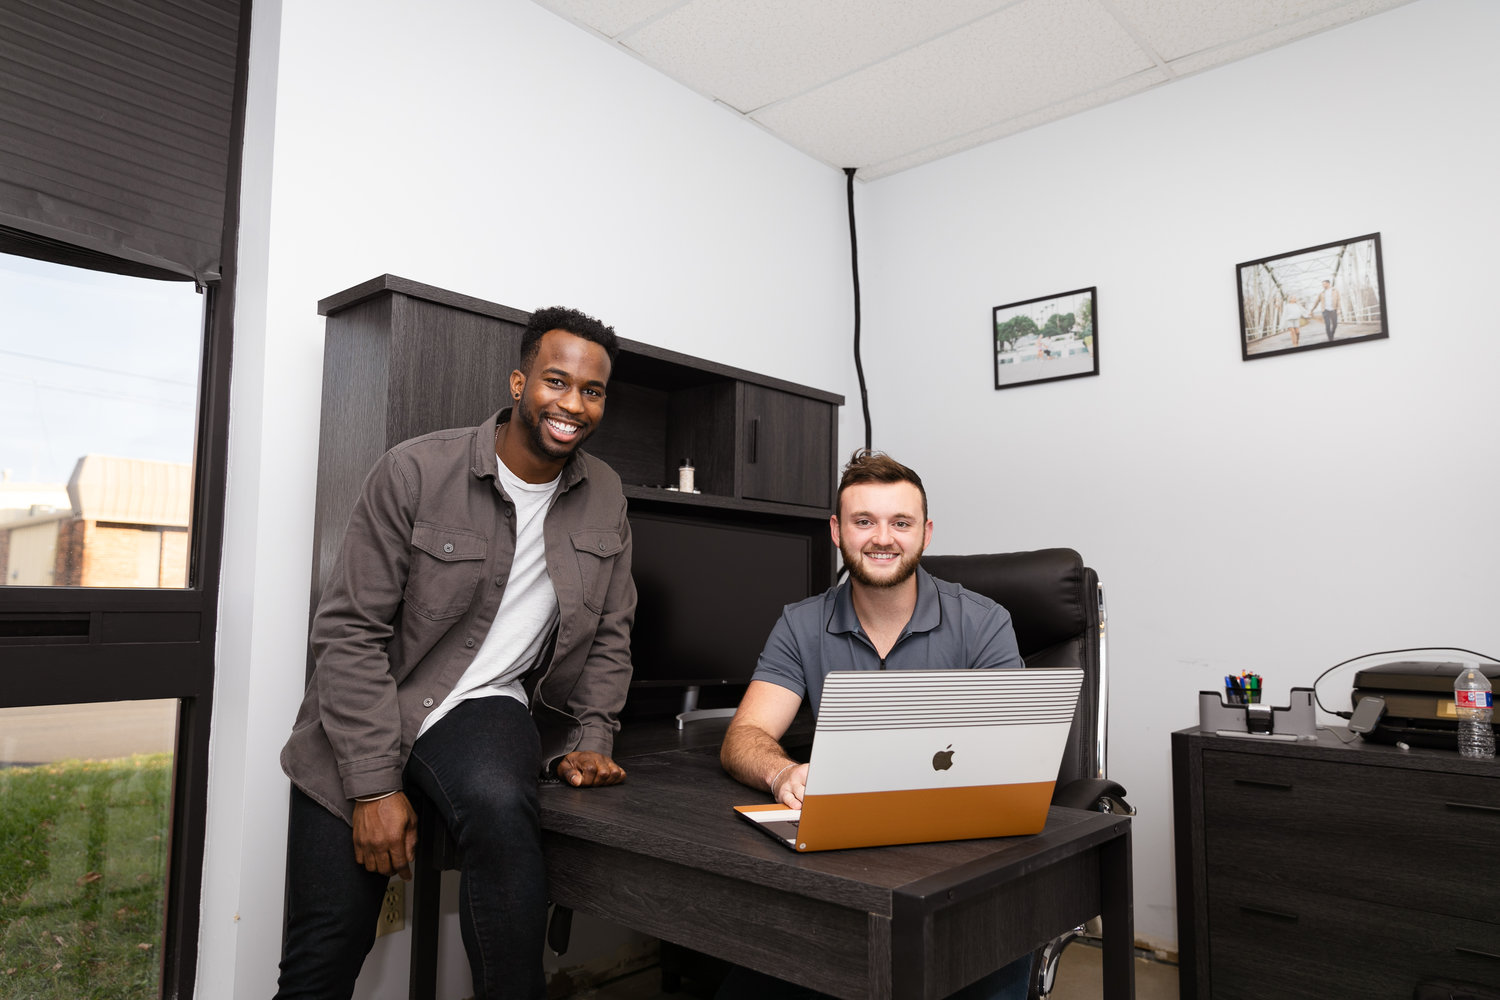 ALPHA DOGS: Rich Haik, right, has teamed up with Courtney Gerwig to lead the growing startup.